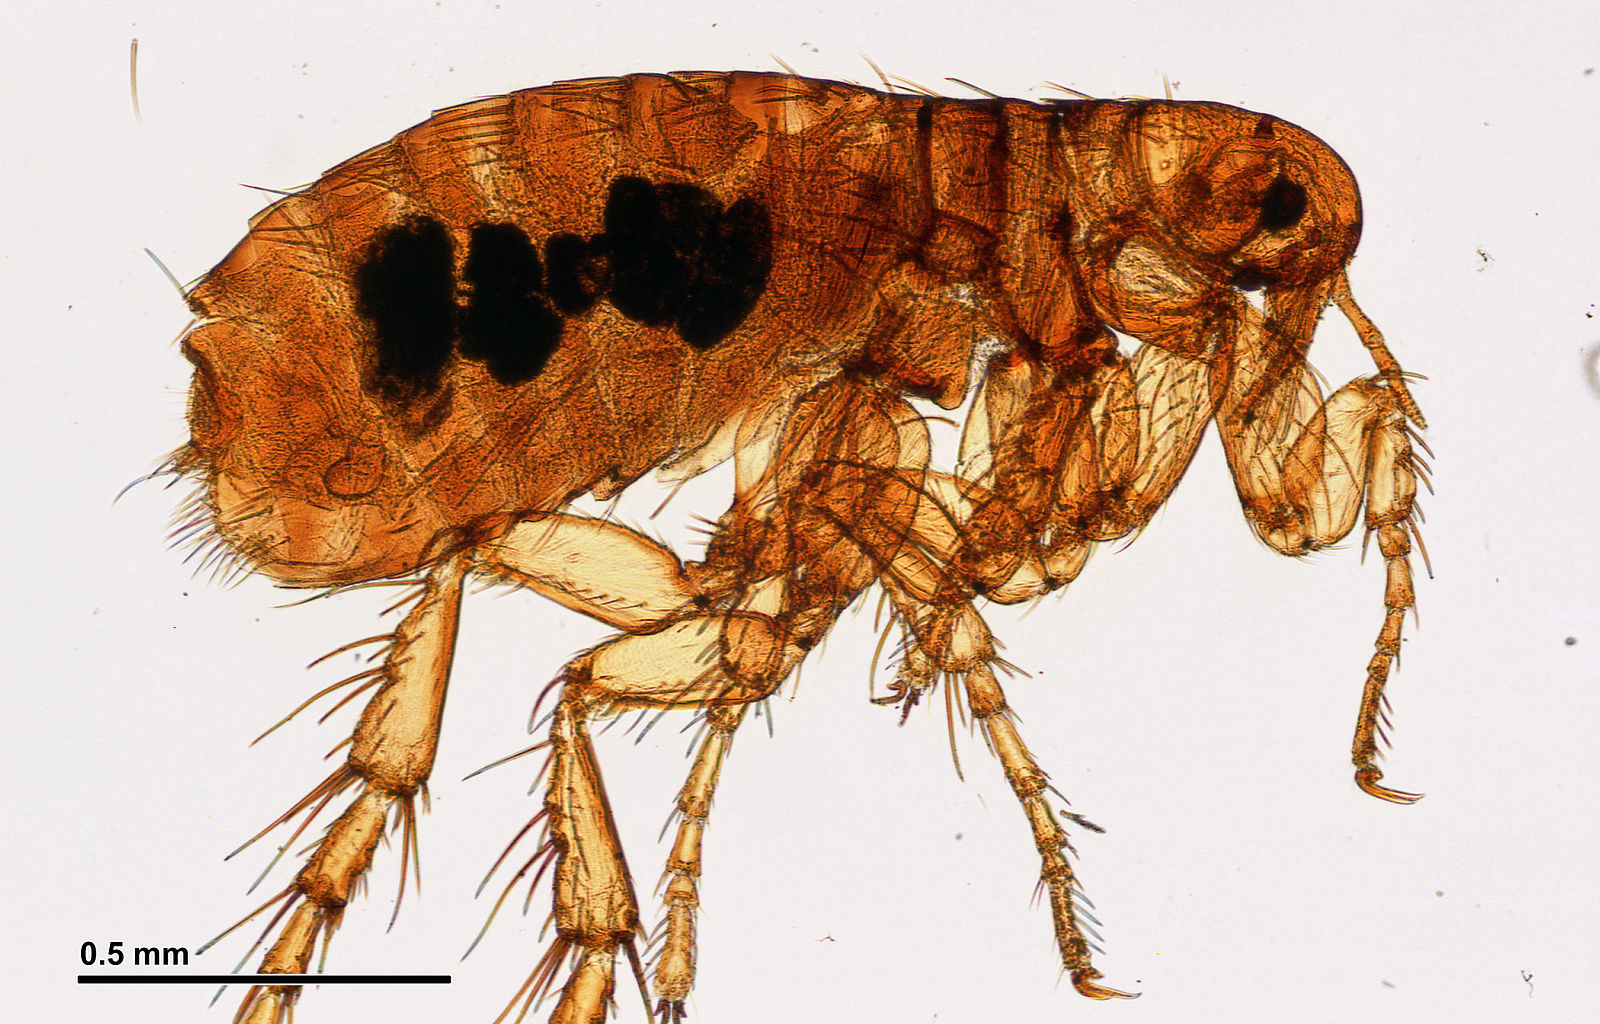 What are Fleas?